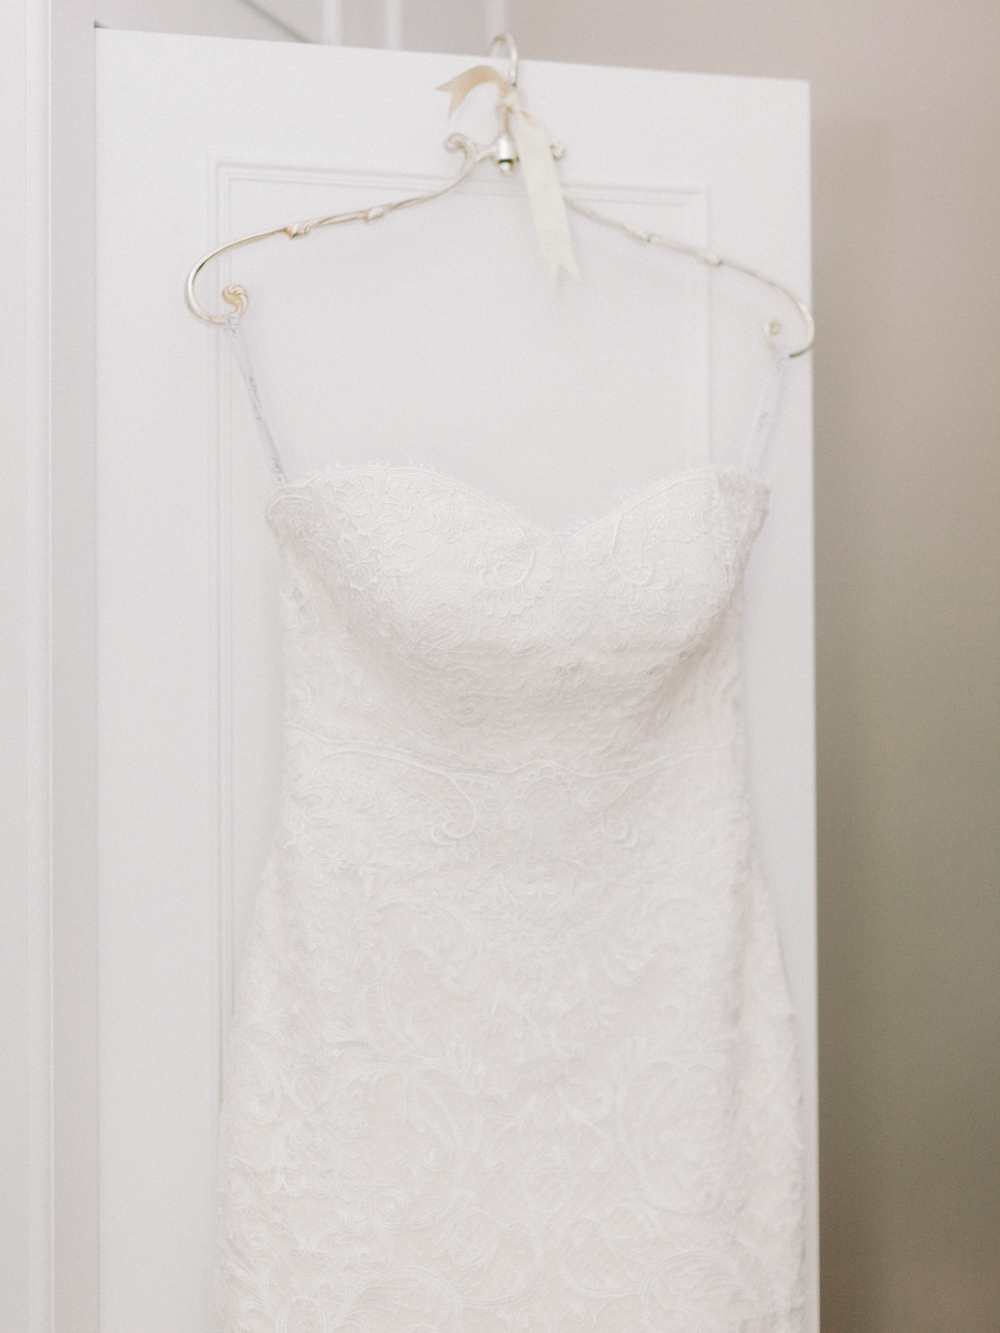 Timeless white lace wedding dress hanging from the door by an antique silver hanger